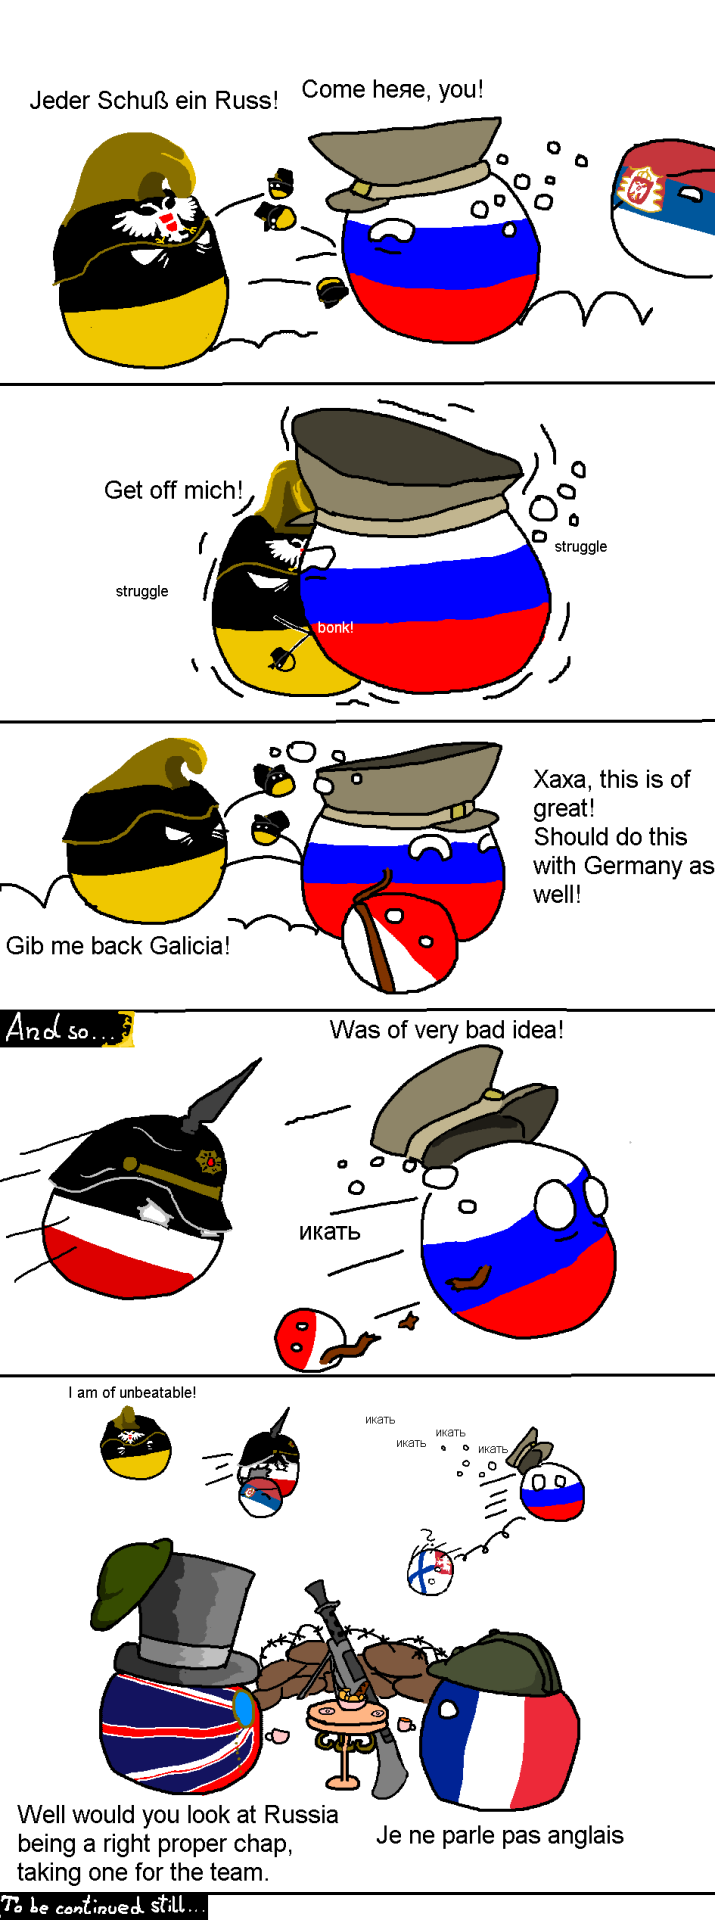 Russia found itself a fight